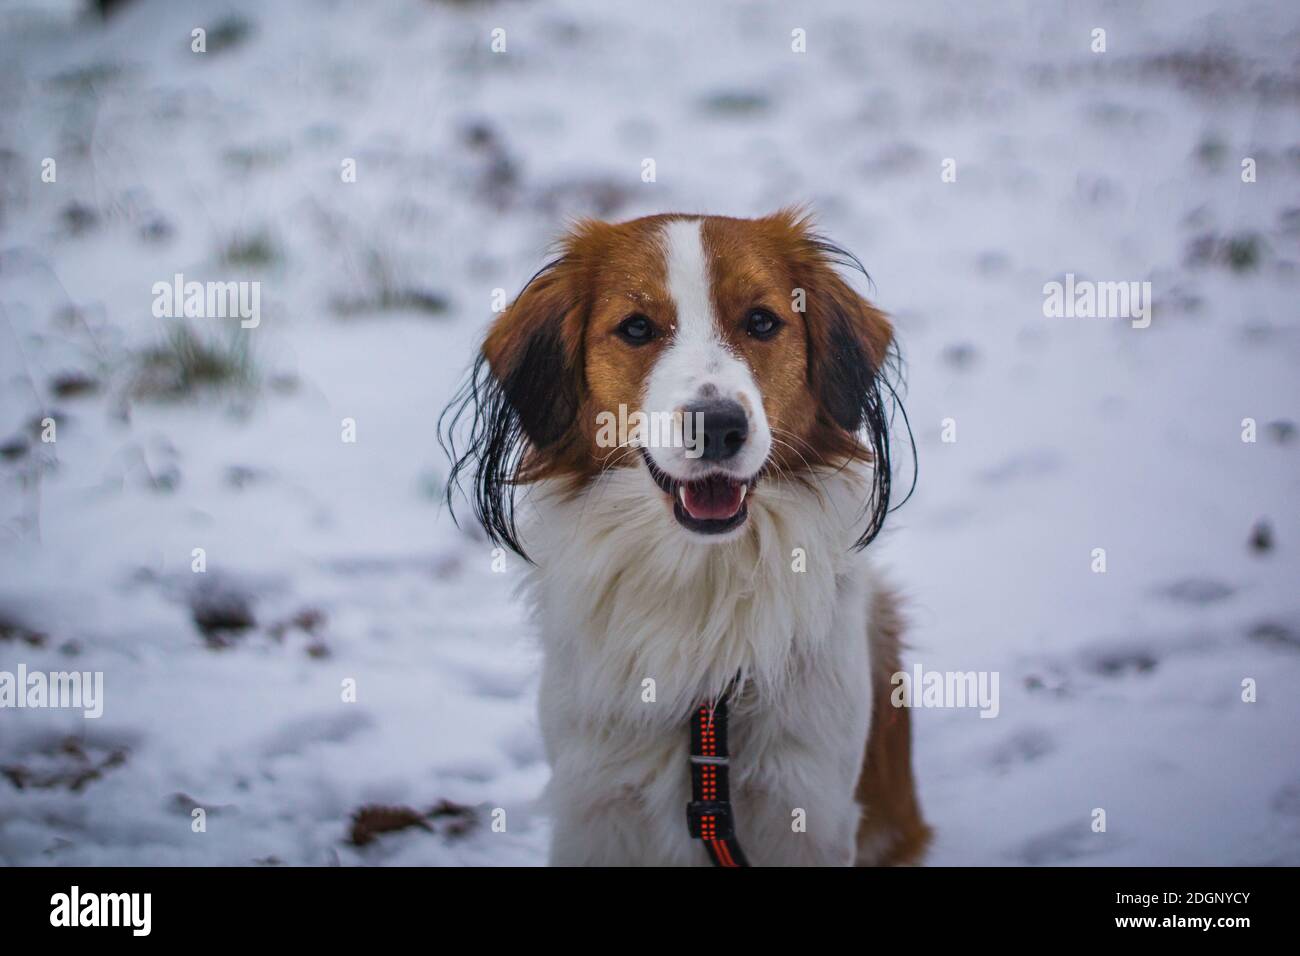 Puppy Dog in the Snow Stock Photo